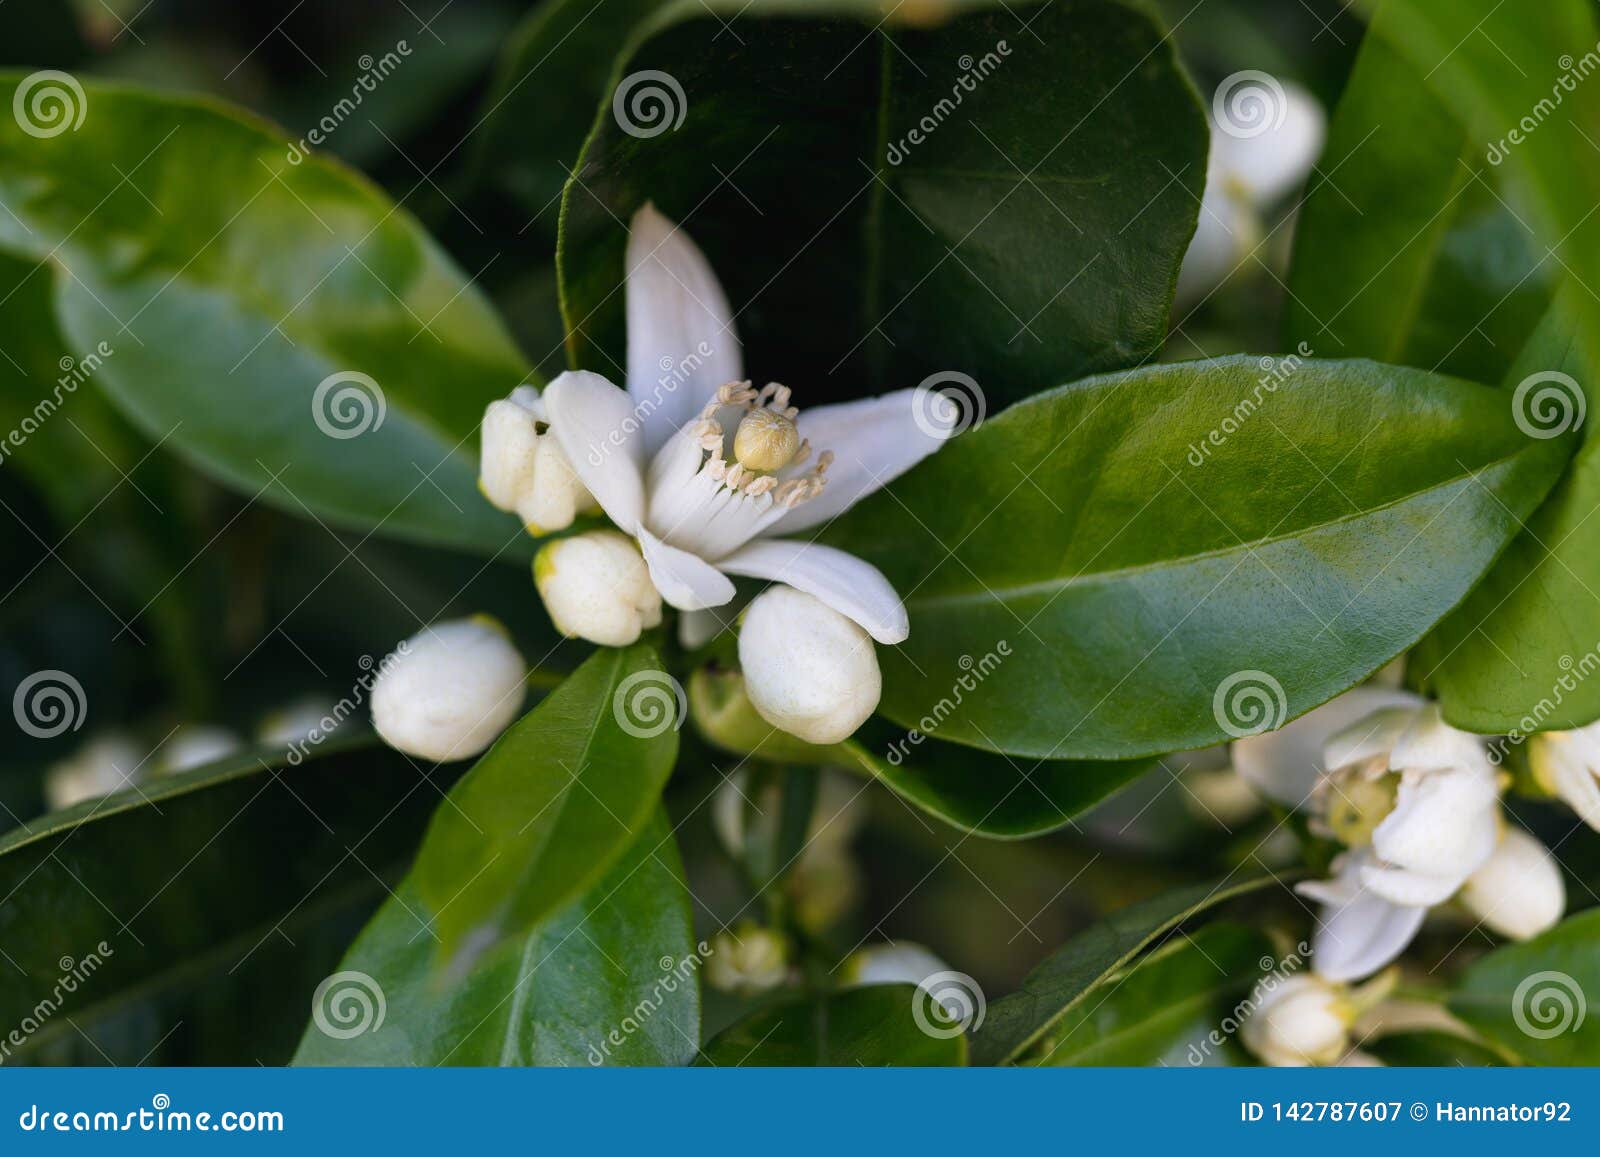 Orange Blossom On A Tree In Spring You Can See A Tiny Orange Fruit Inside A Flower Stock Image Image Of Floral Garden 142787607